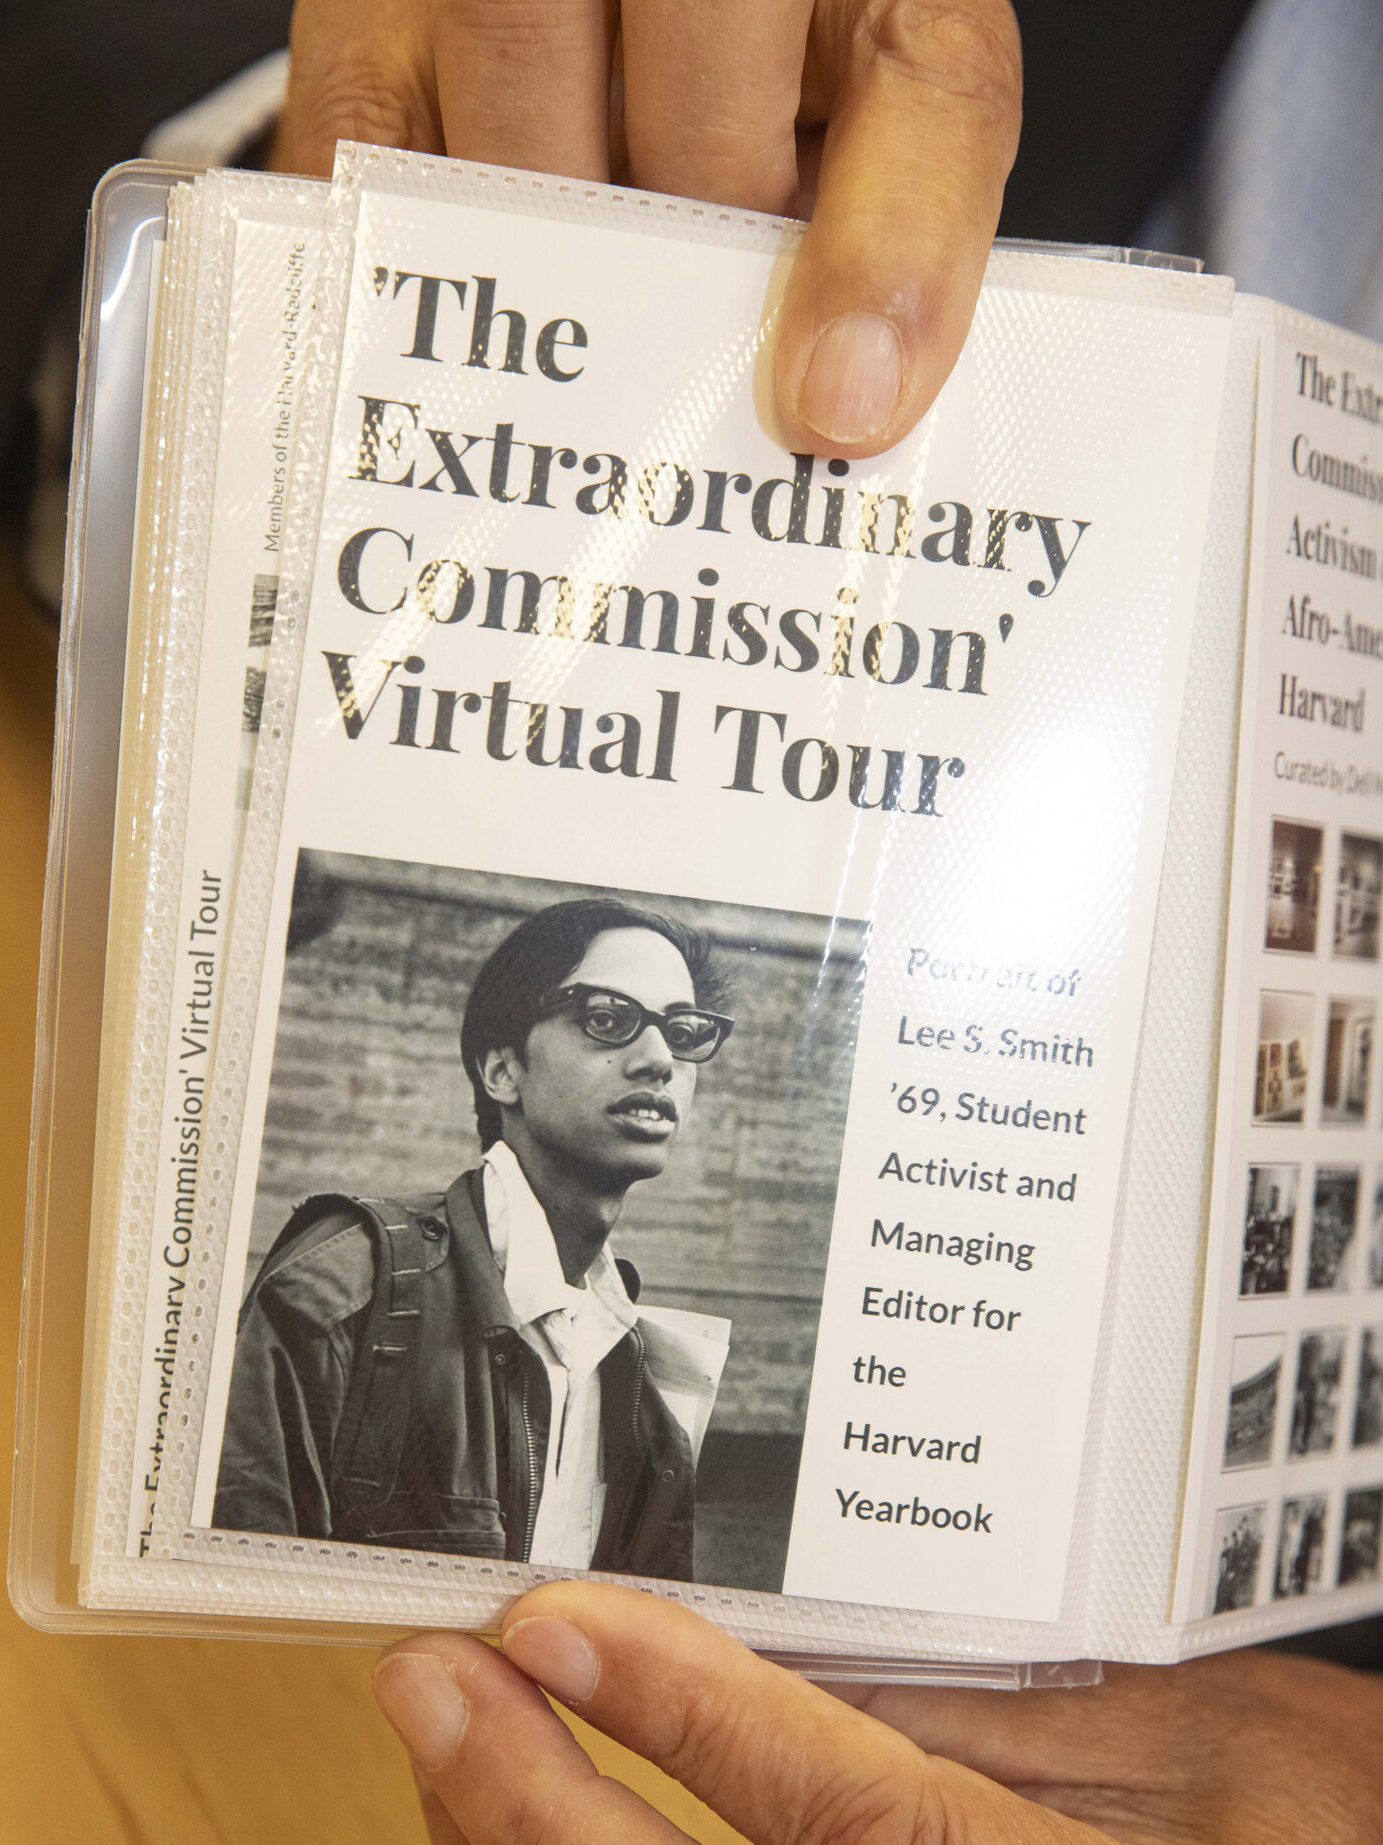 Lee Smith on the front of a cover article "The Extraordinary Commission' Virtual Tour.